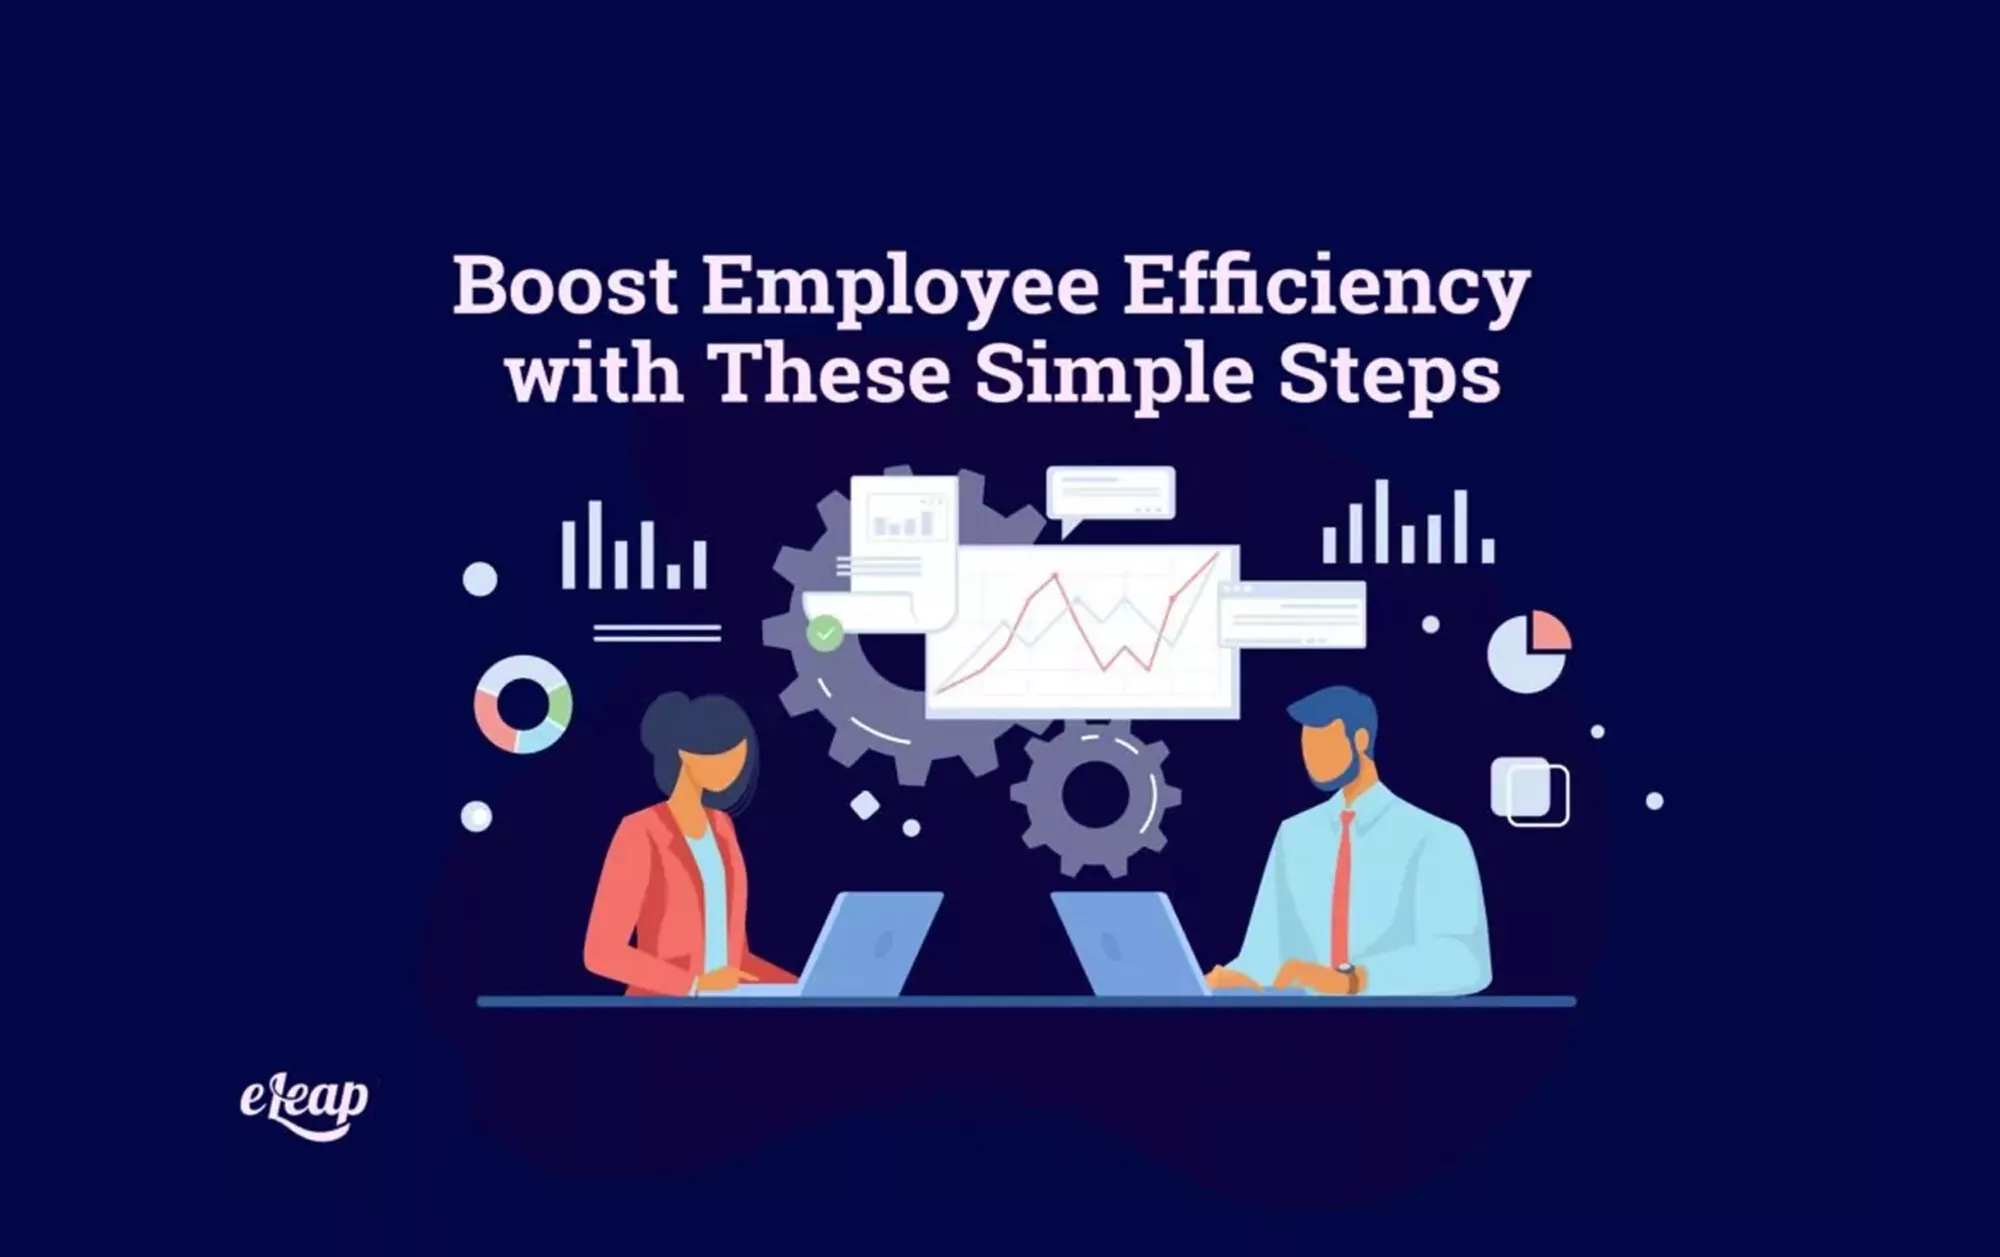 Boost Employee Efficiency with These Simple Steps